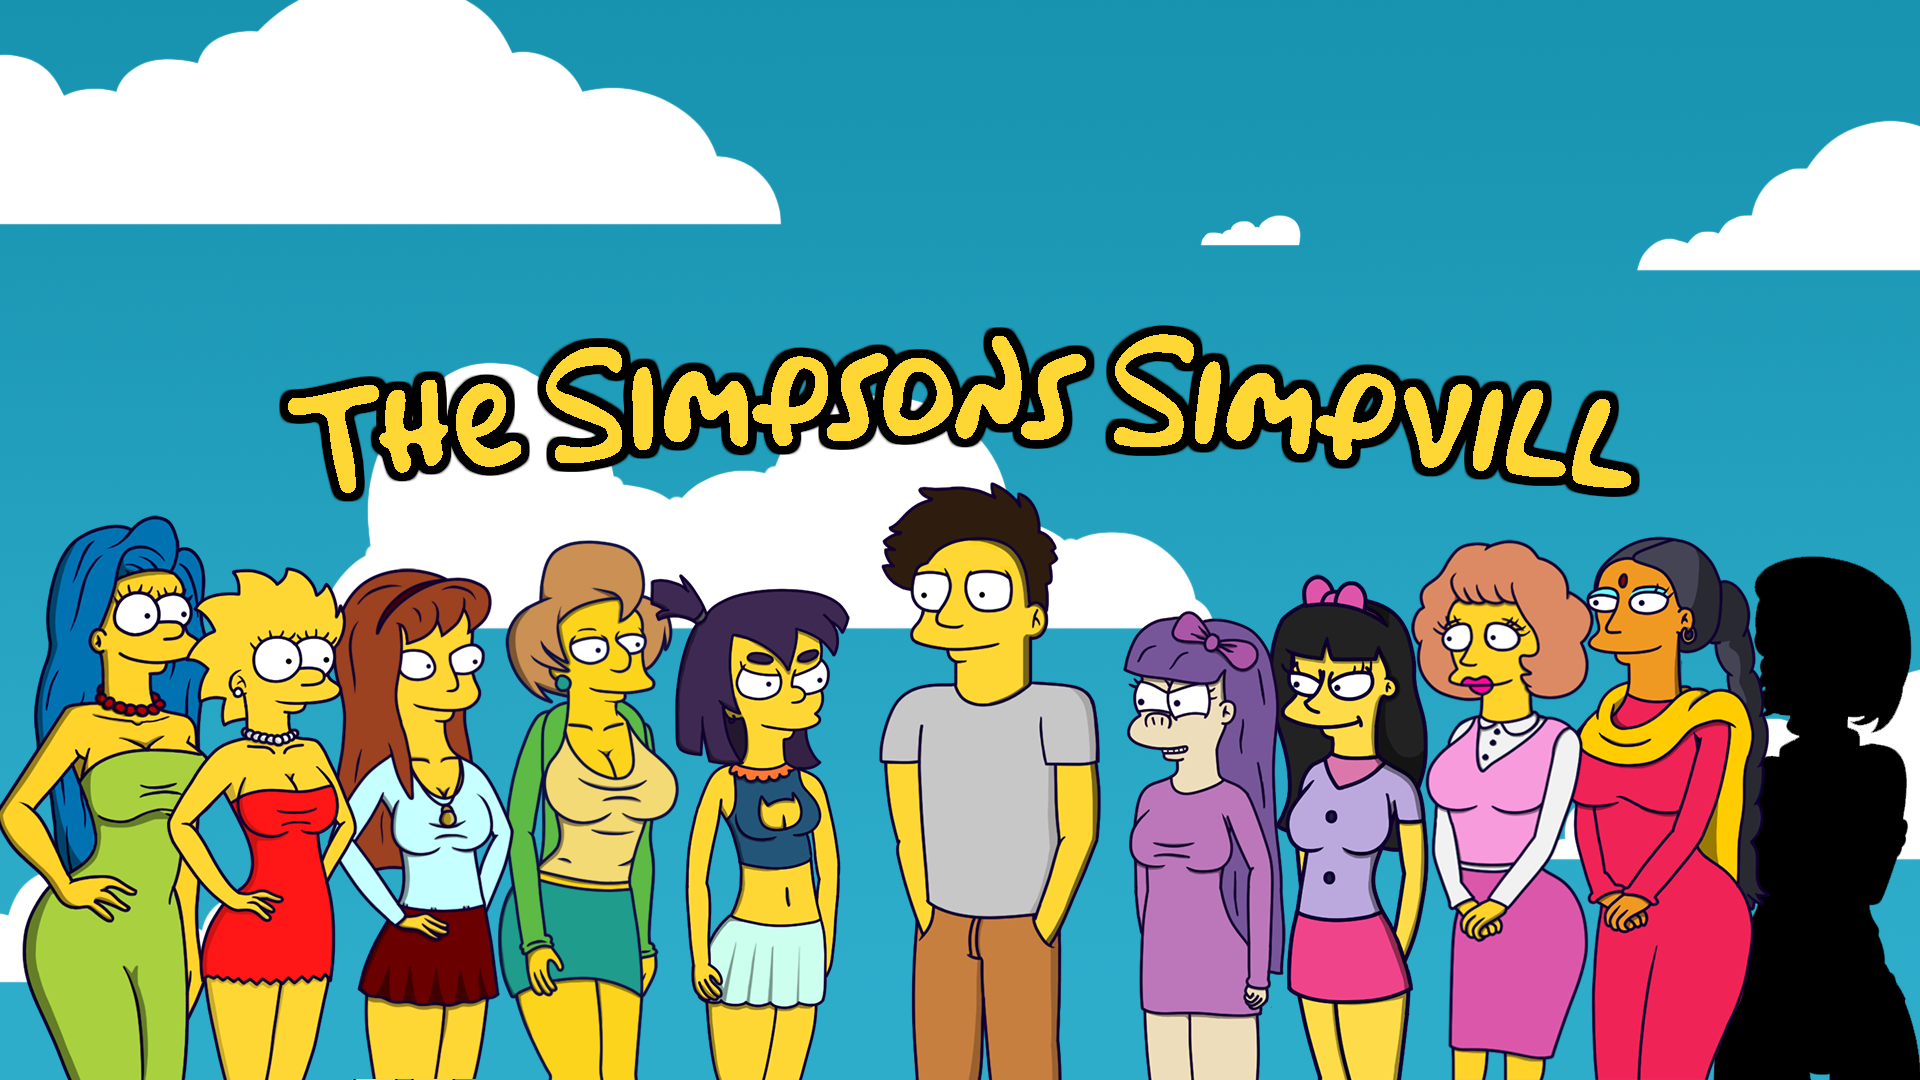 Simpsons Porn 4 Some - The Simpsons Simpvill V1.03 by Squizzy